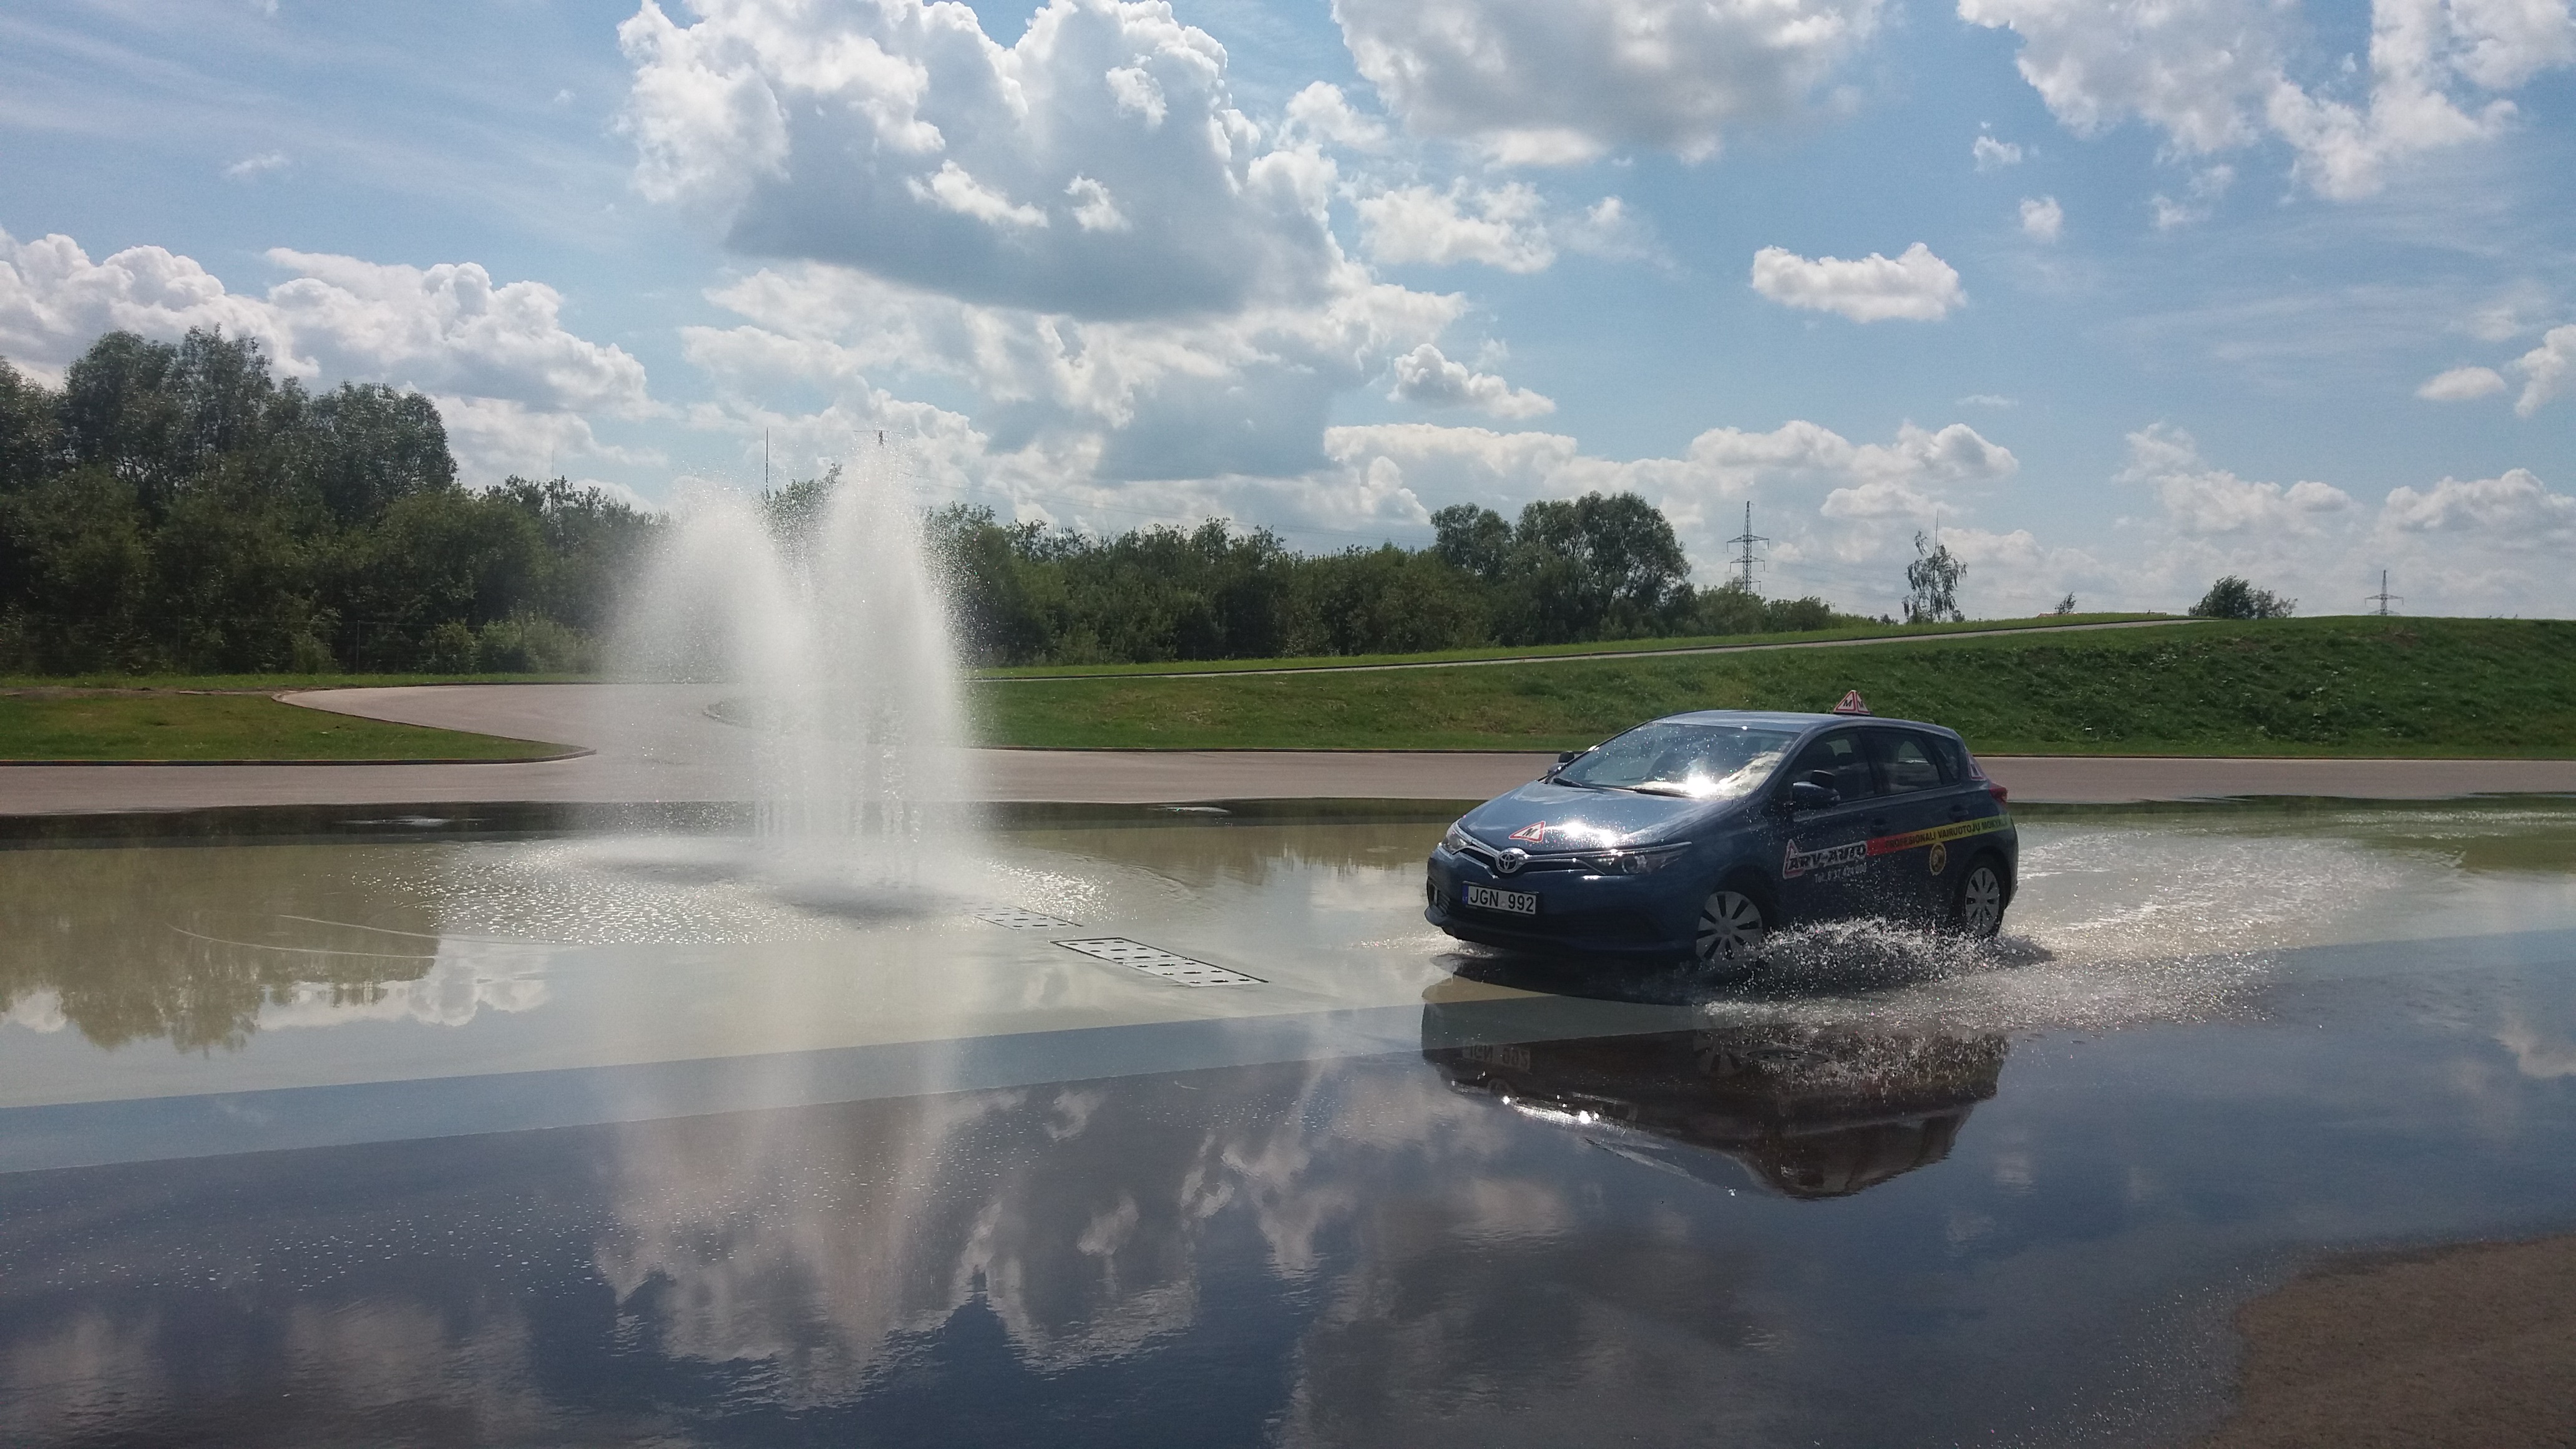 The slippery road track with skidpan is used as an element in risk-education training.